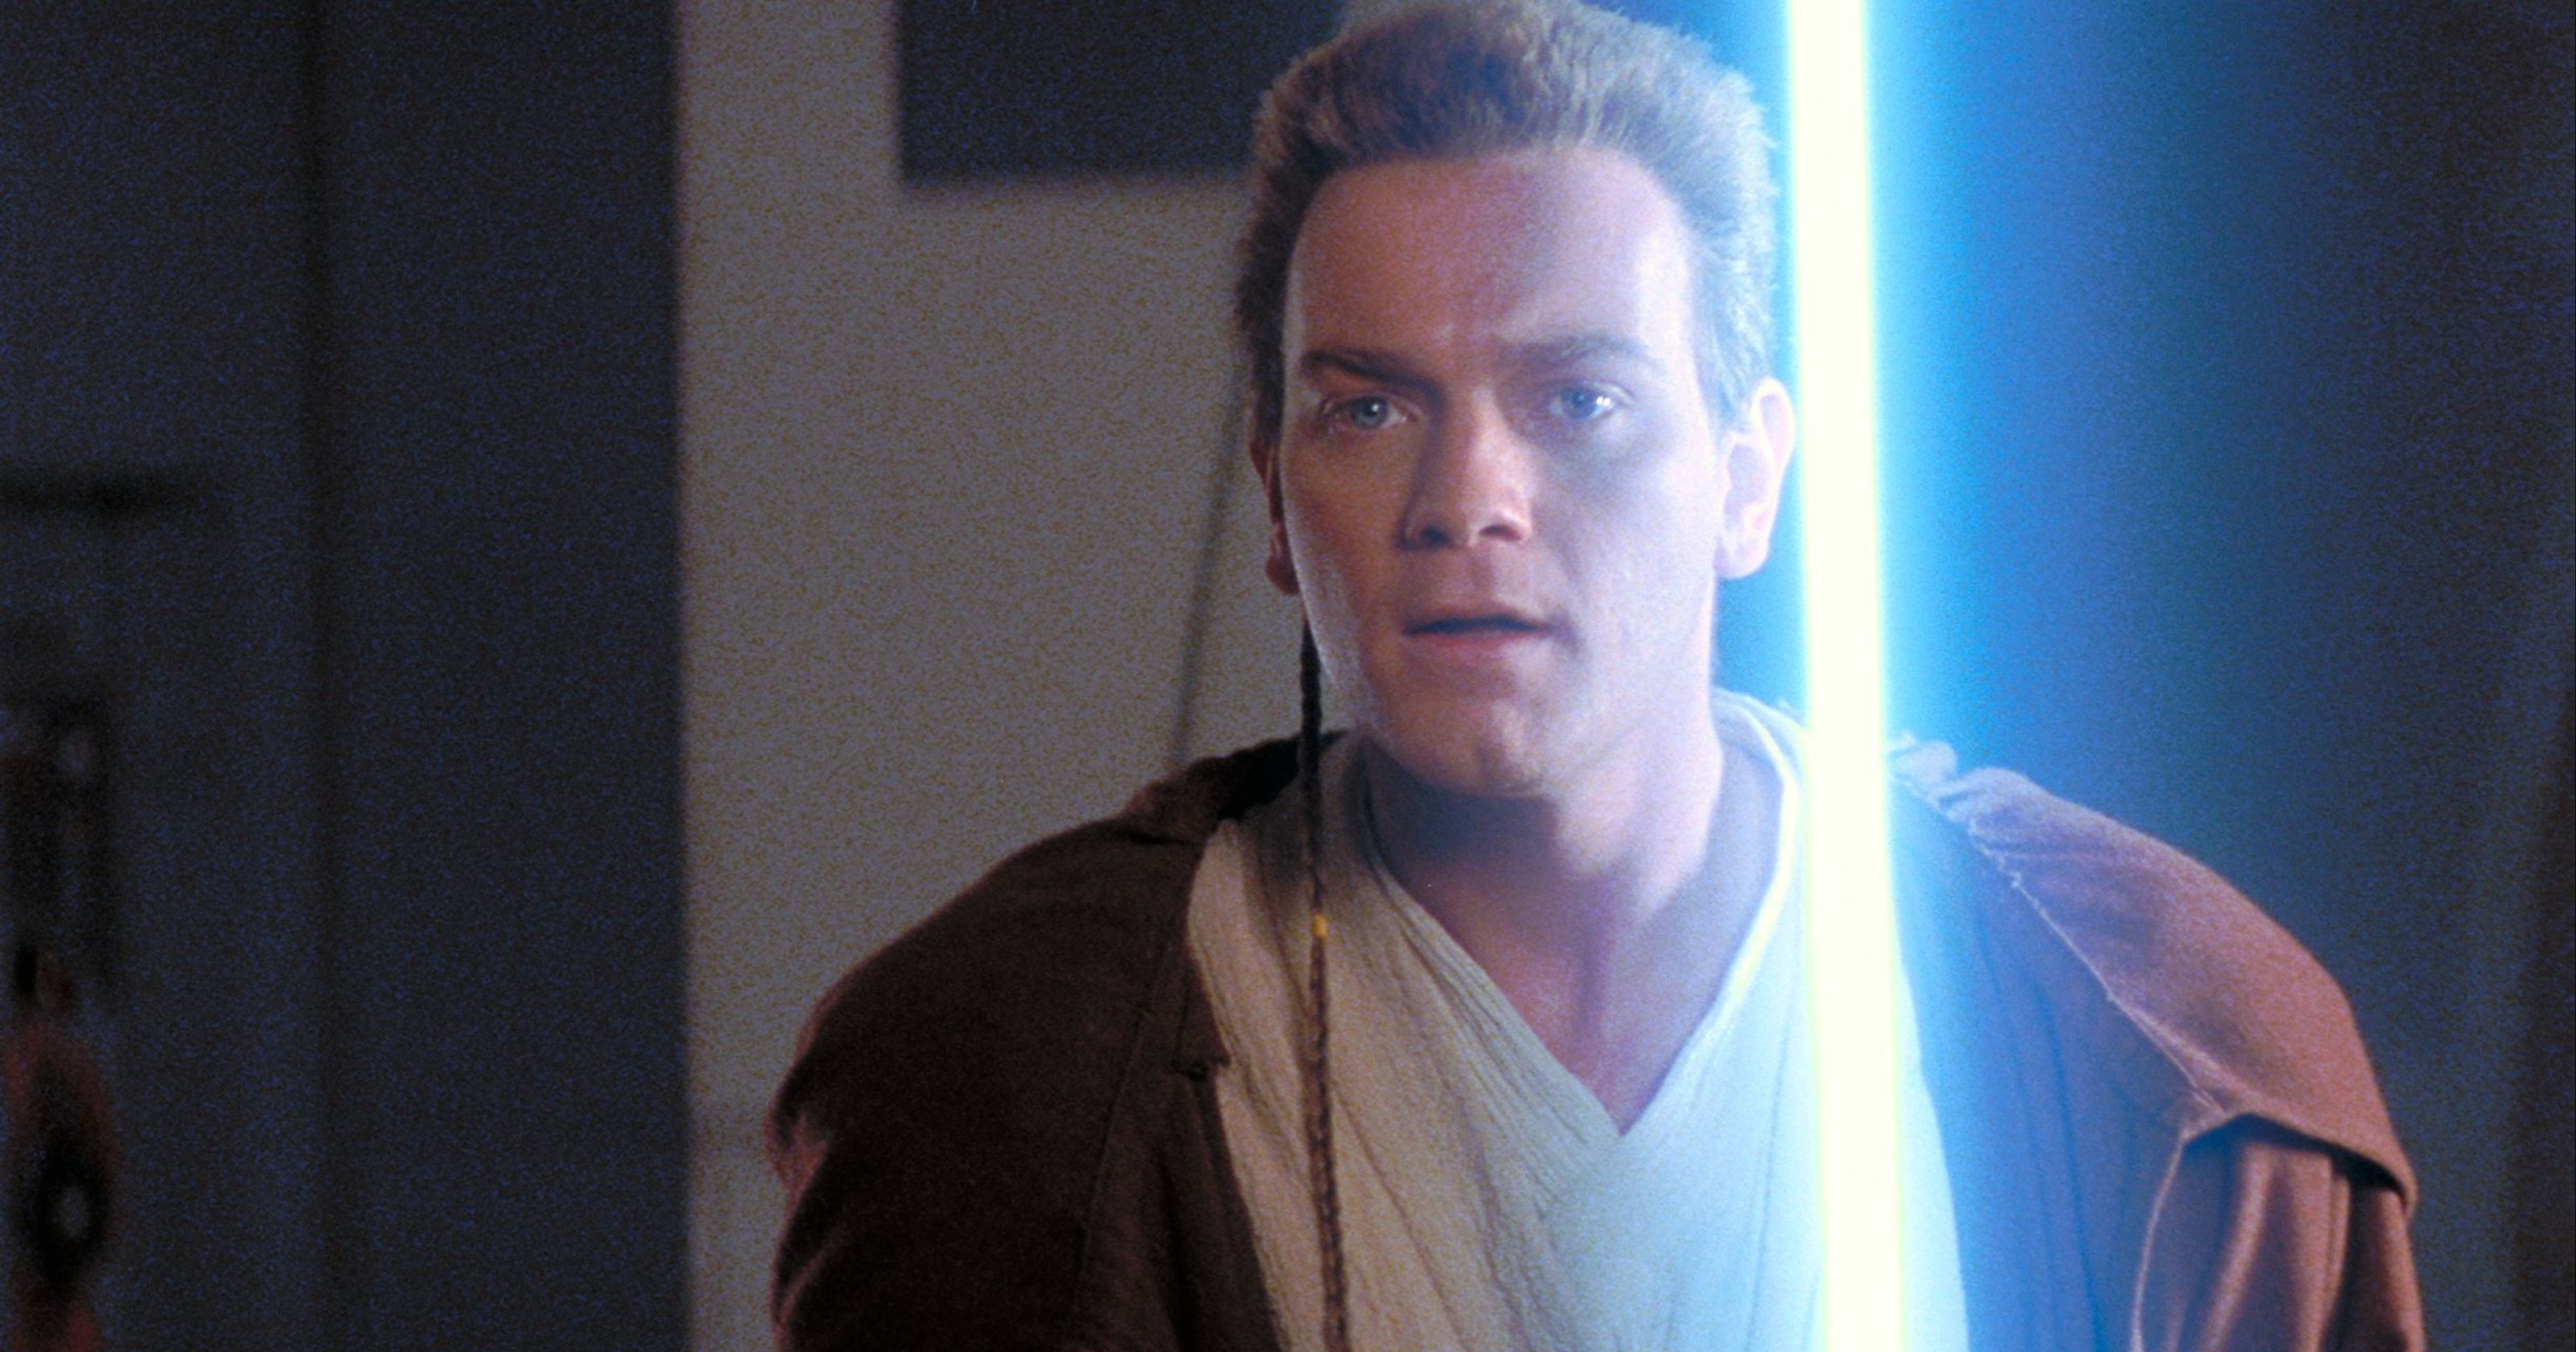 3200x1680 30+ Star Wars Episode I: The Phantom Menace HD Wallpapers and Backgrounds